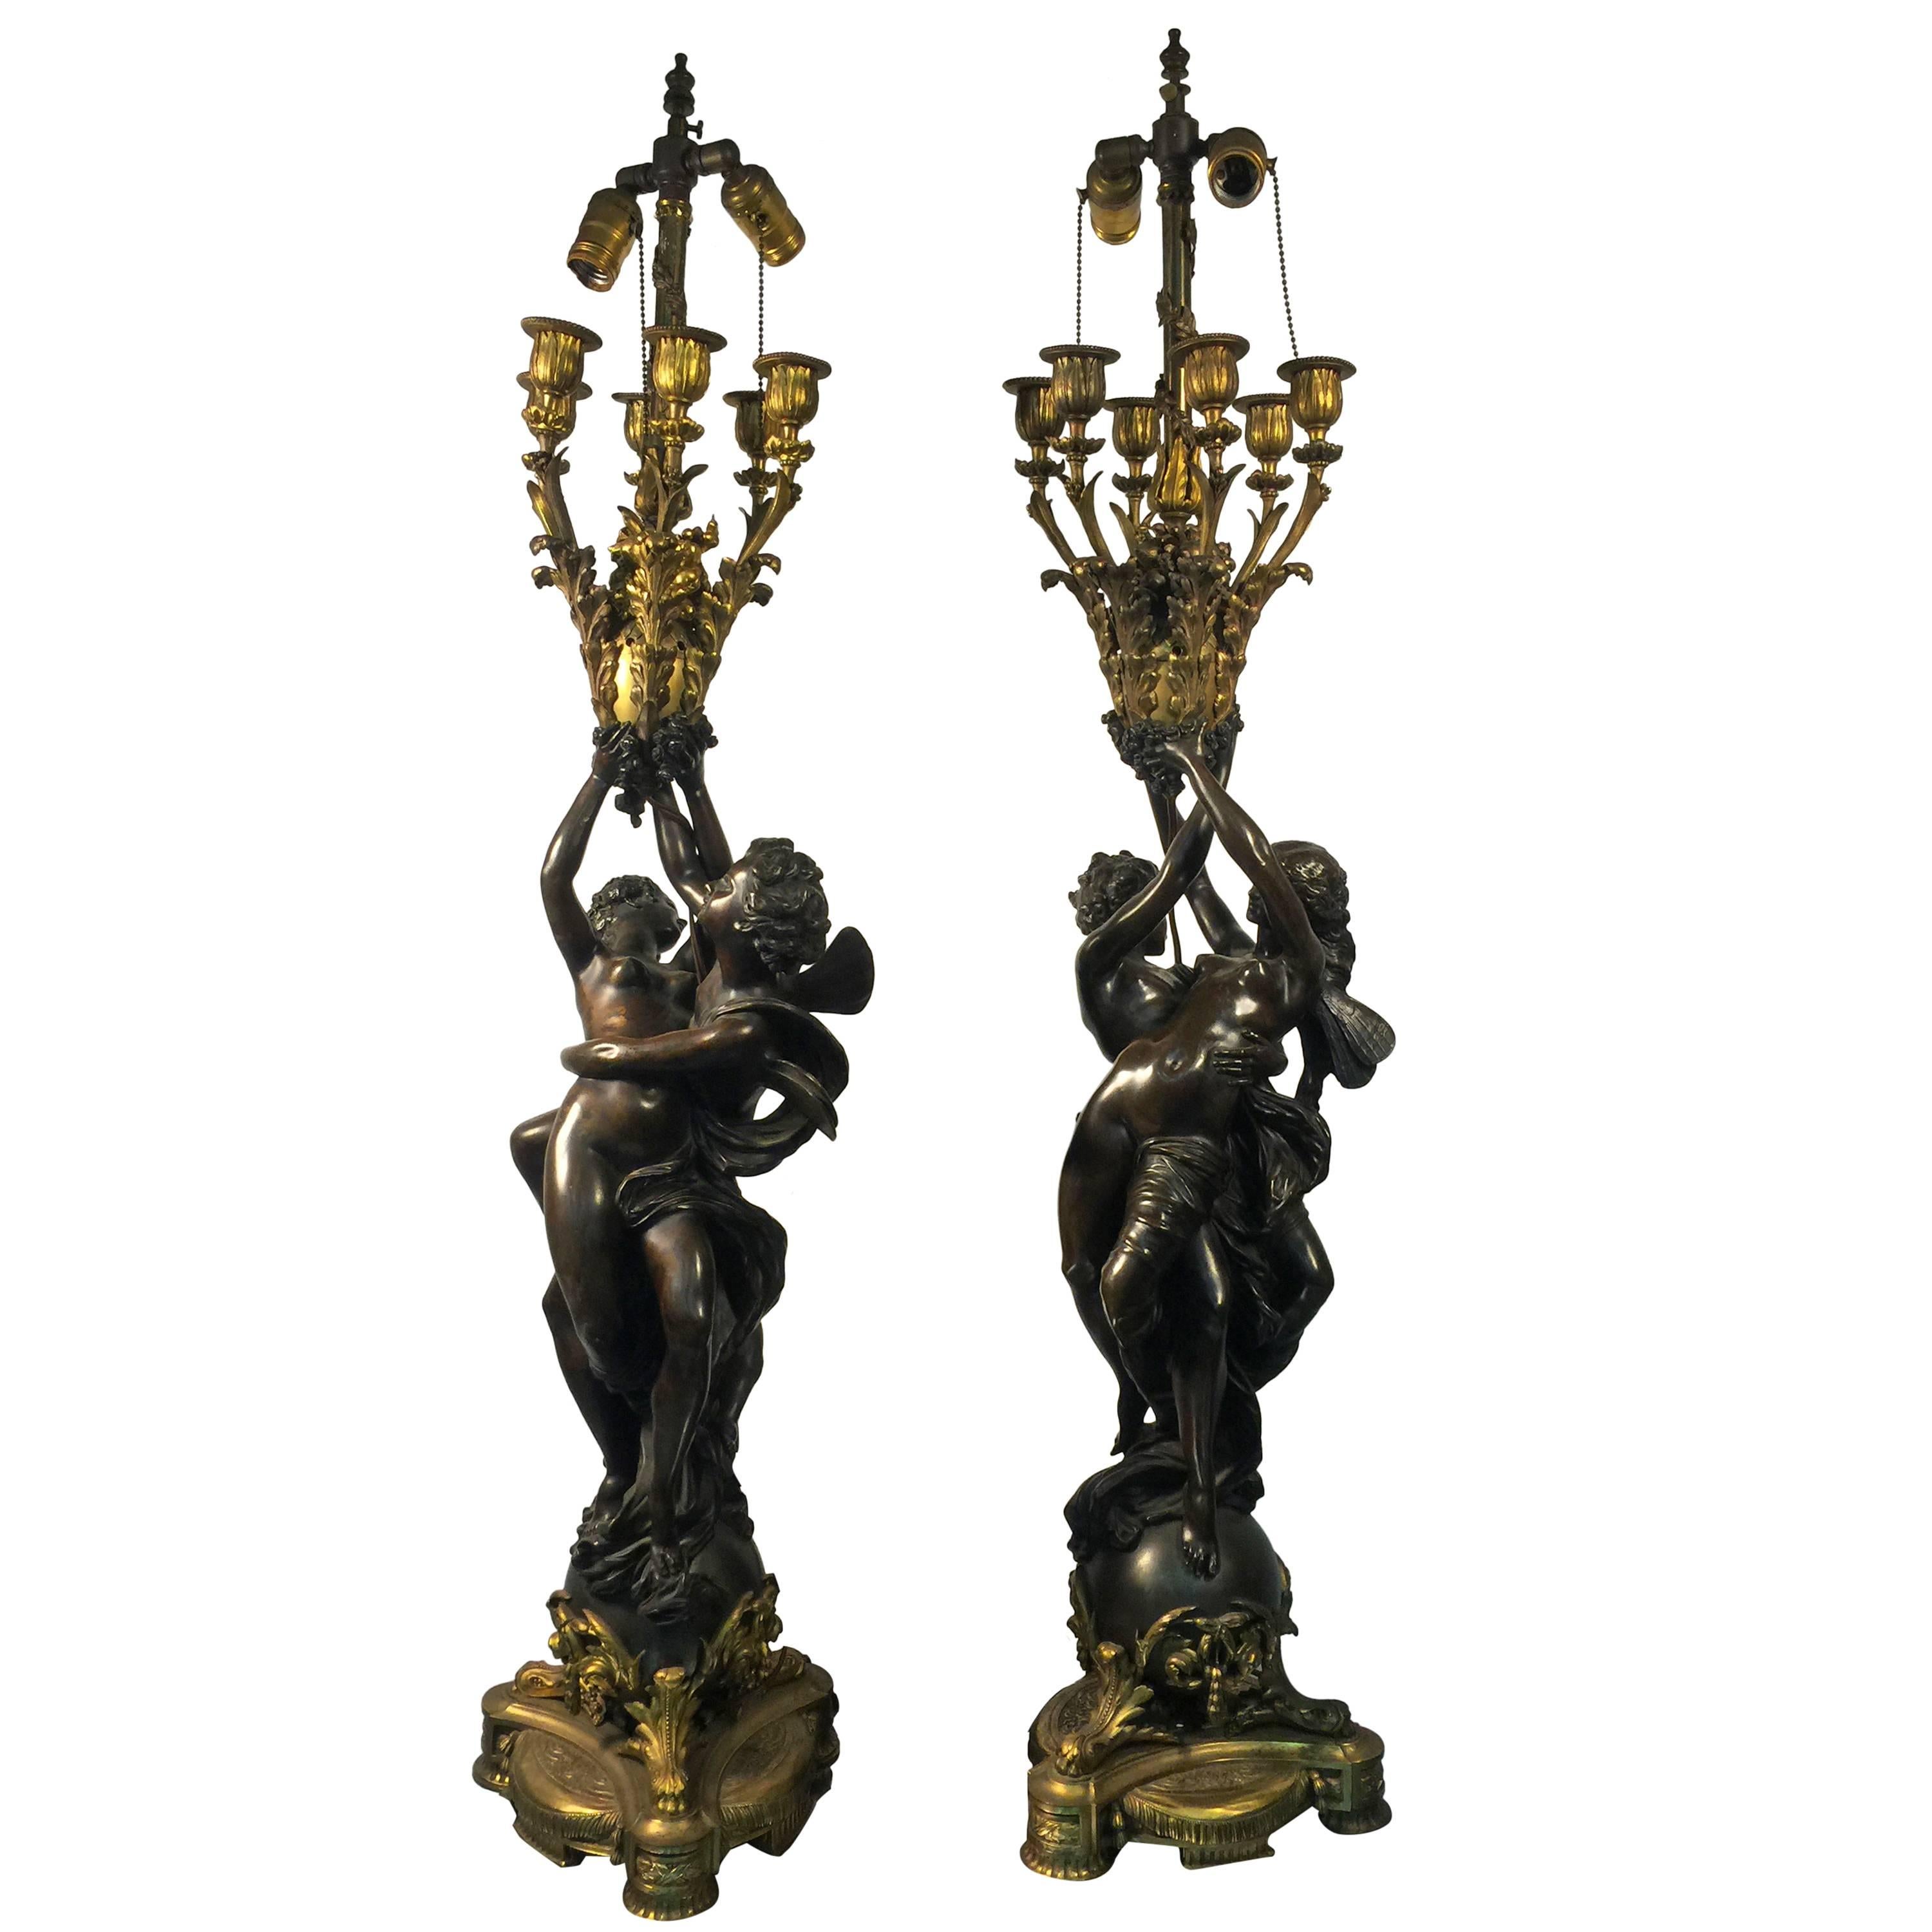 Monumental Pair of French Doré Bronze Louis XV Style Figural Candelabra Lamps